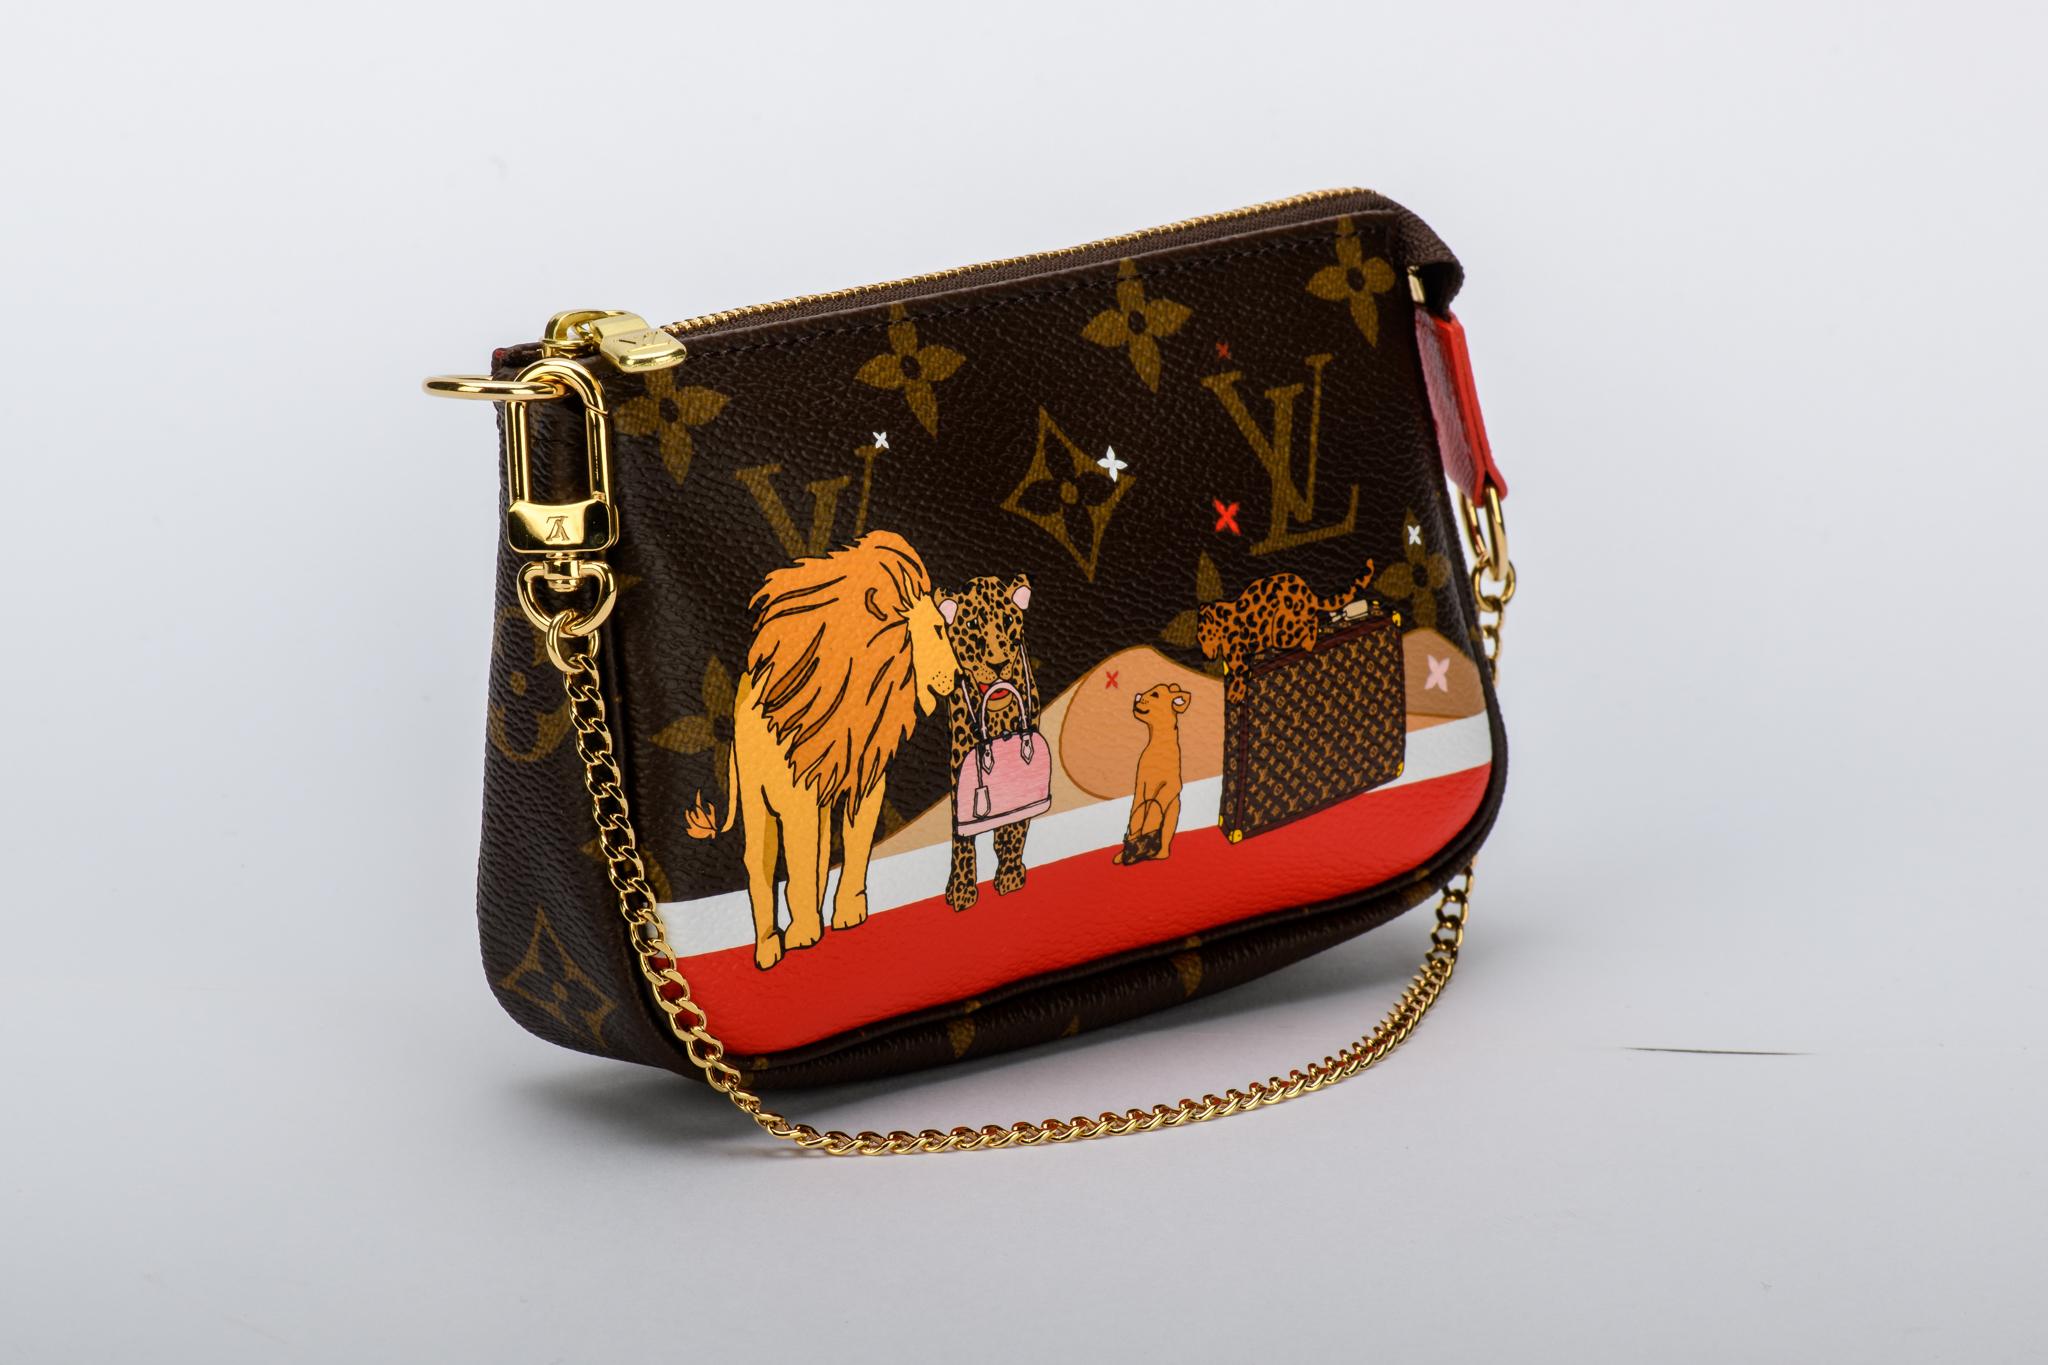 Louis Vuitton limited edition Christmas 2018 mini pouchette. Monogram canvas with lions and ghepards. Comes with original dust cover and box.
